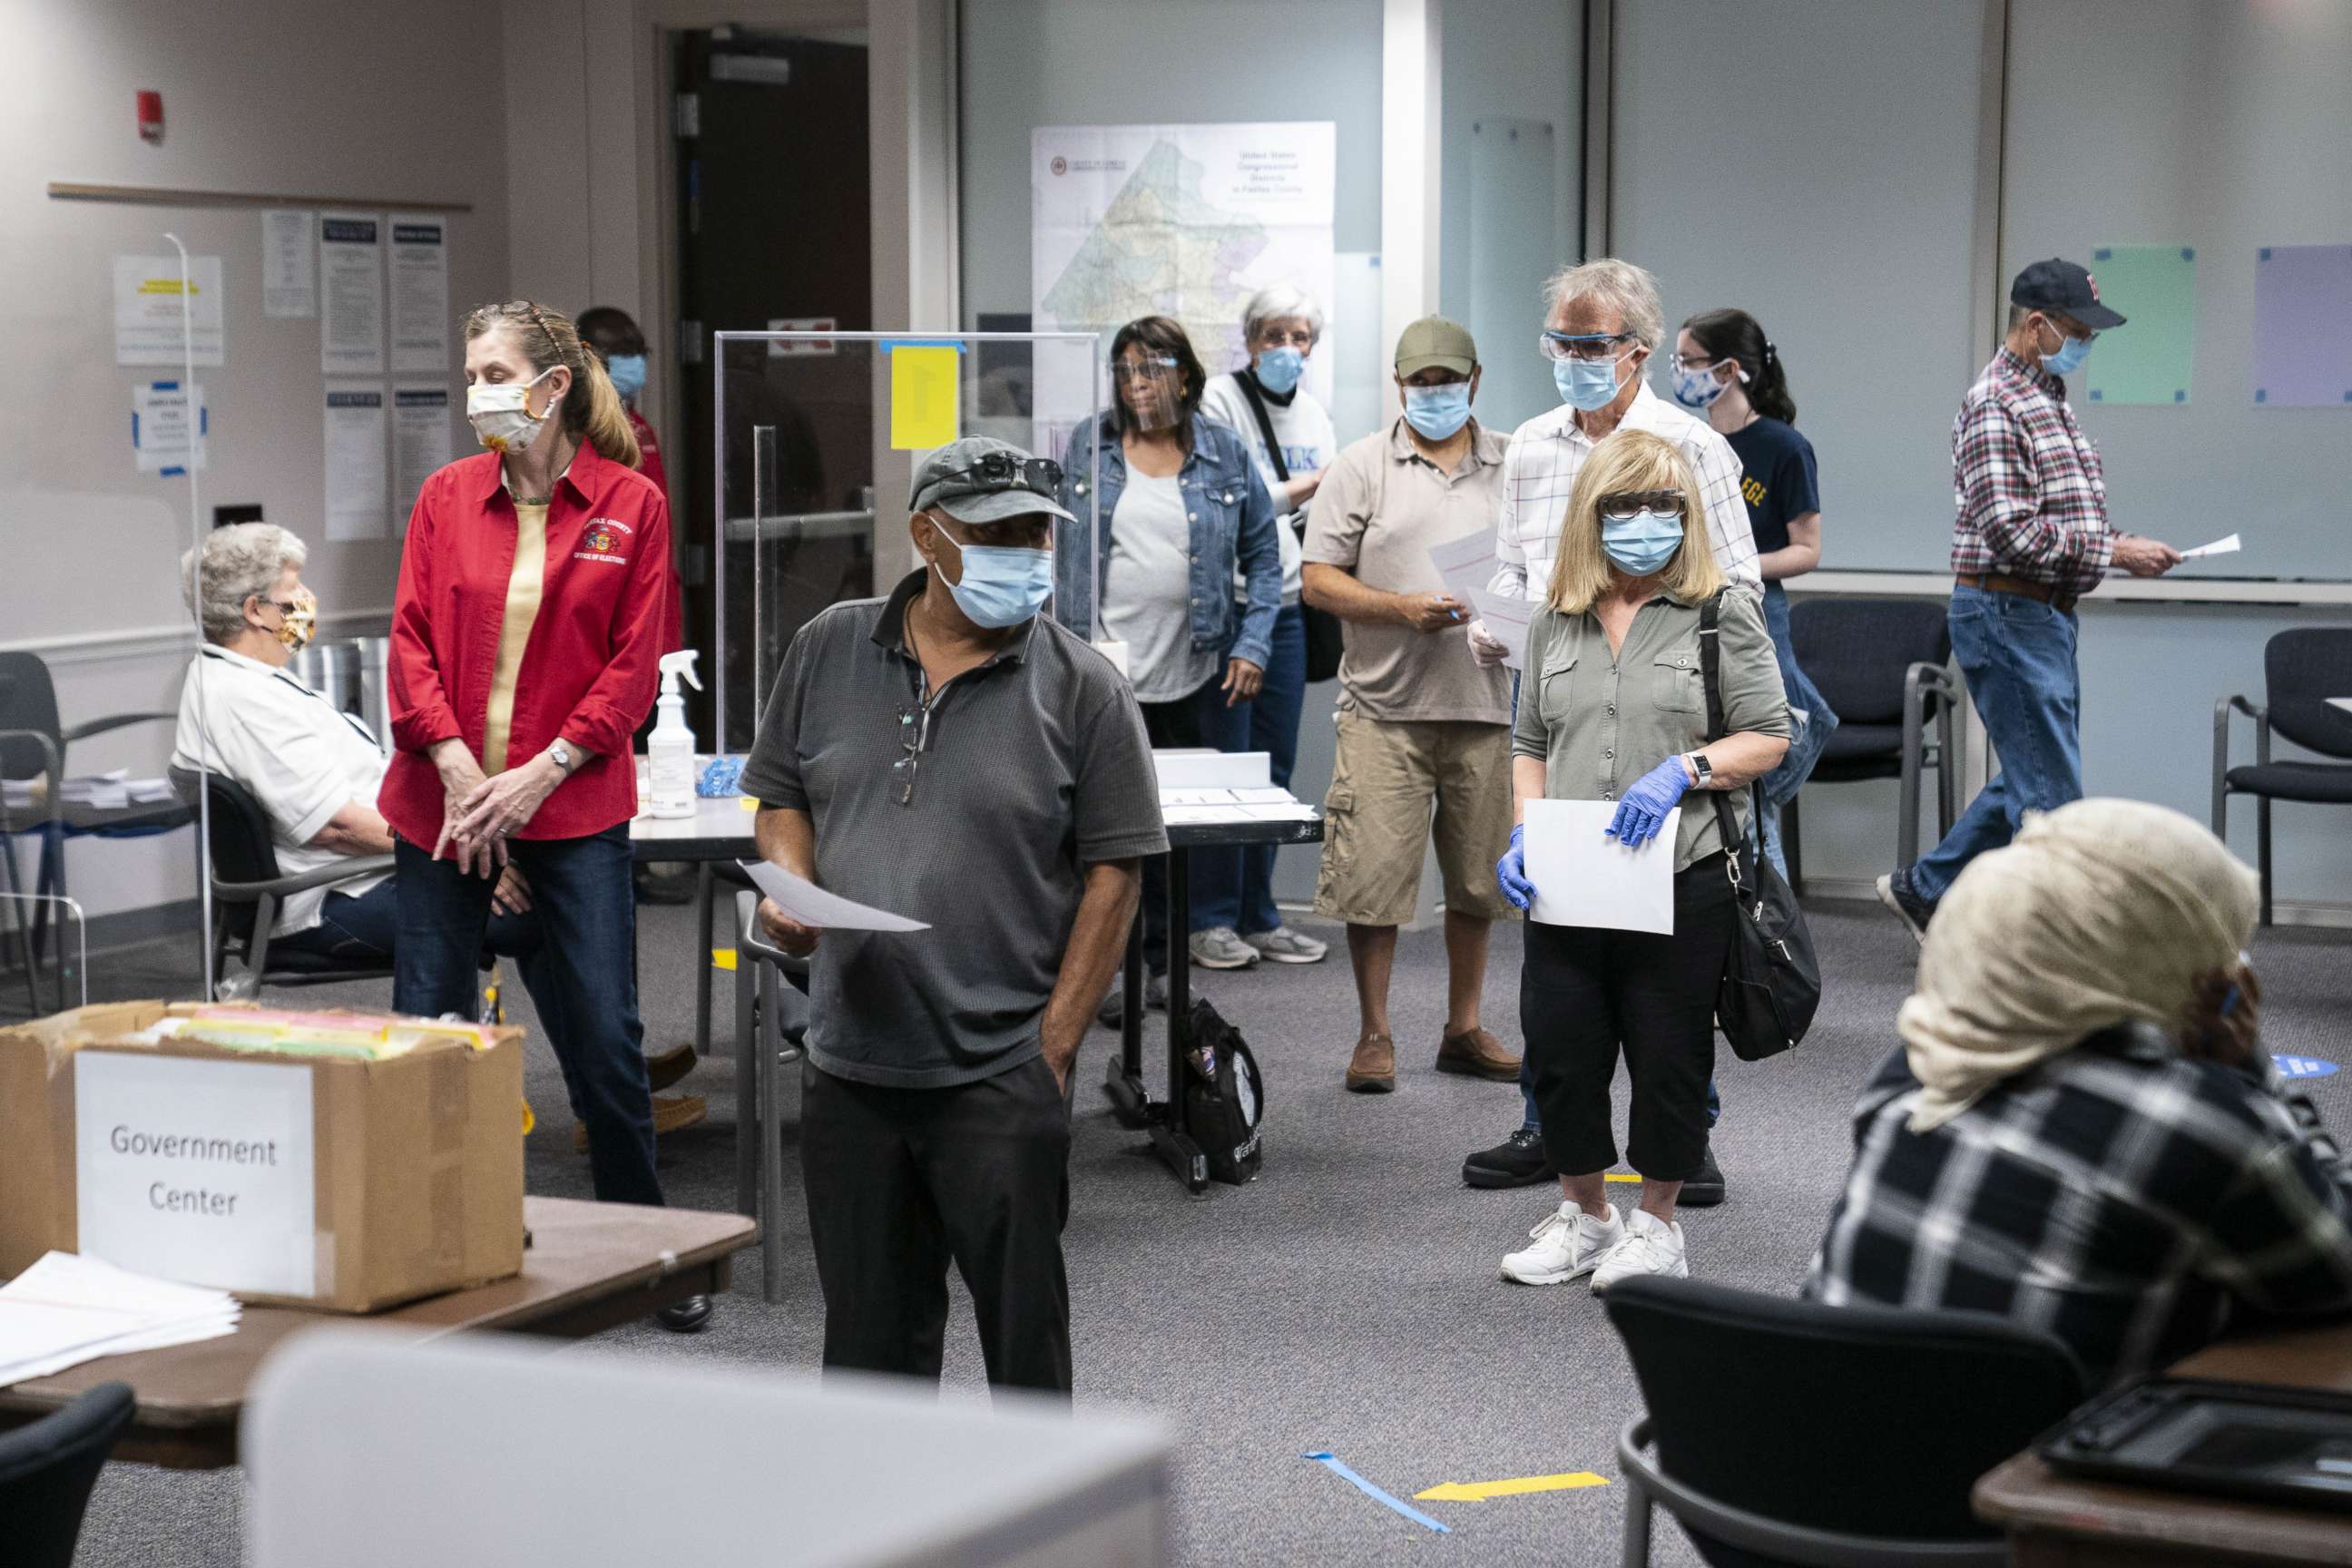 PHOTO: Voters wearing protective masks stand in line to cast ballots at an early voting polling location for the 2020 Presidential elections in Fairfax, Va., Sept. 18, 2020.